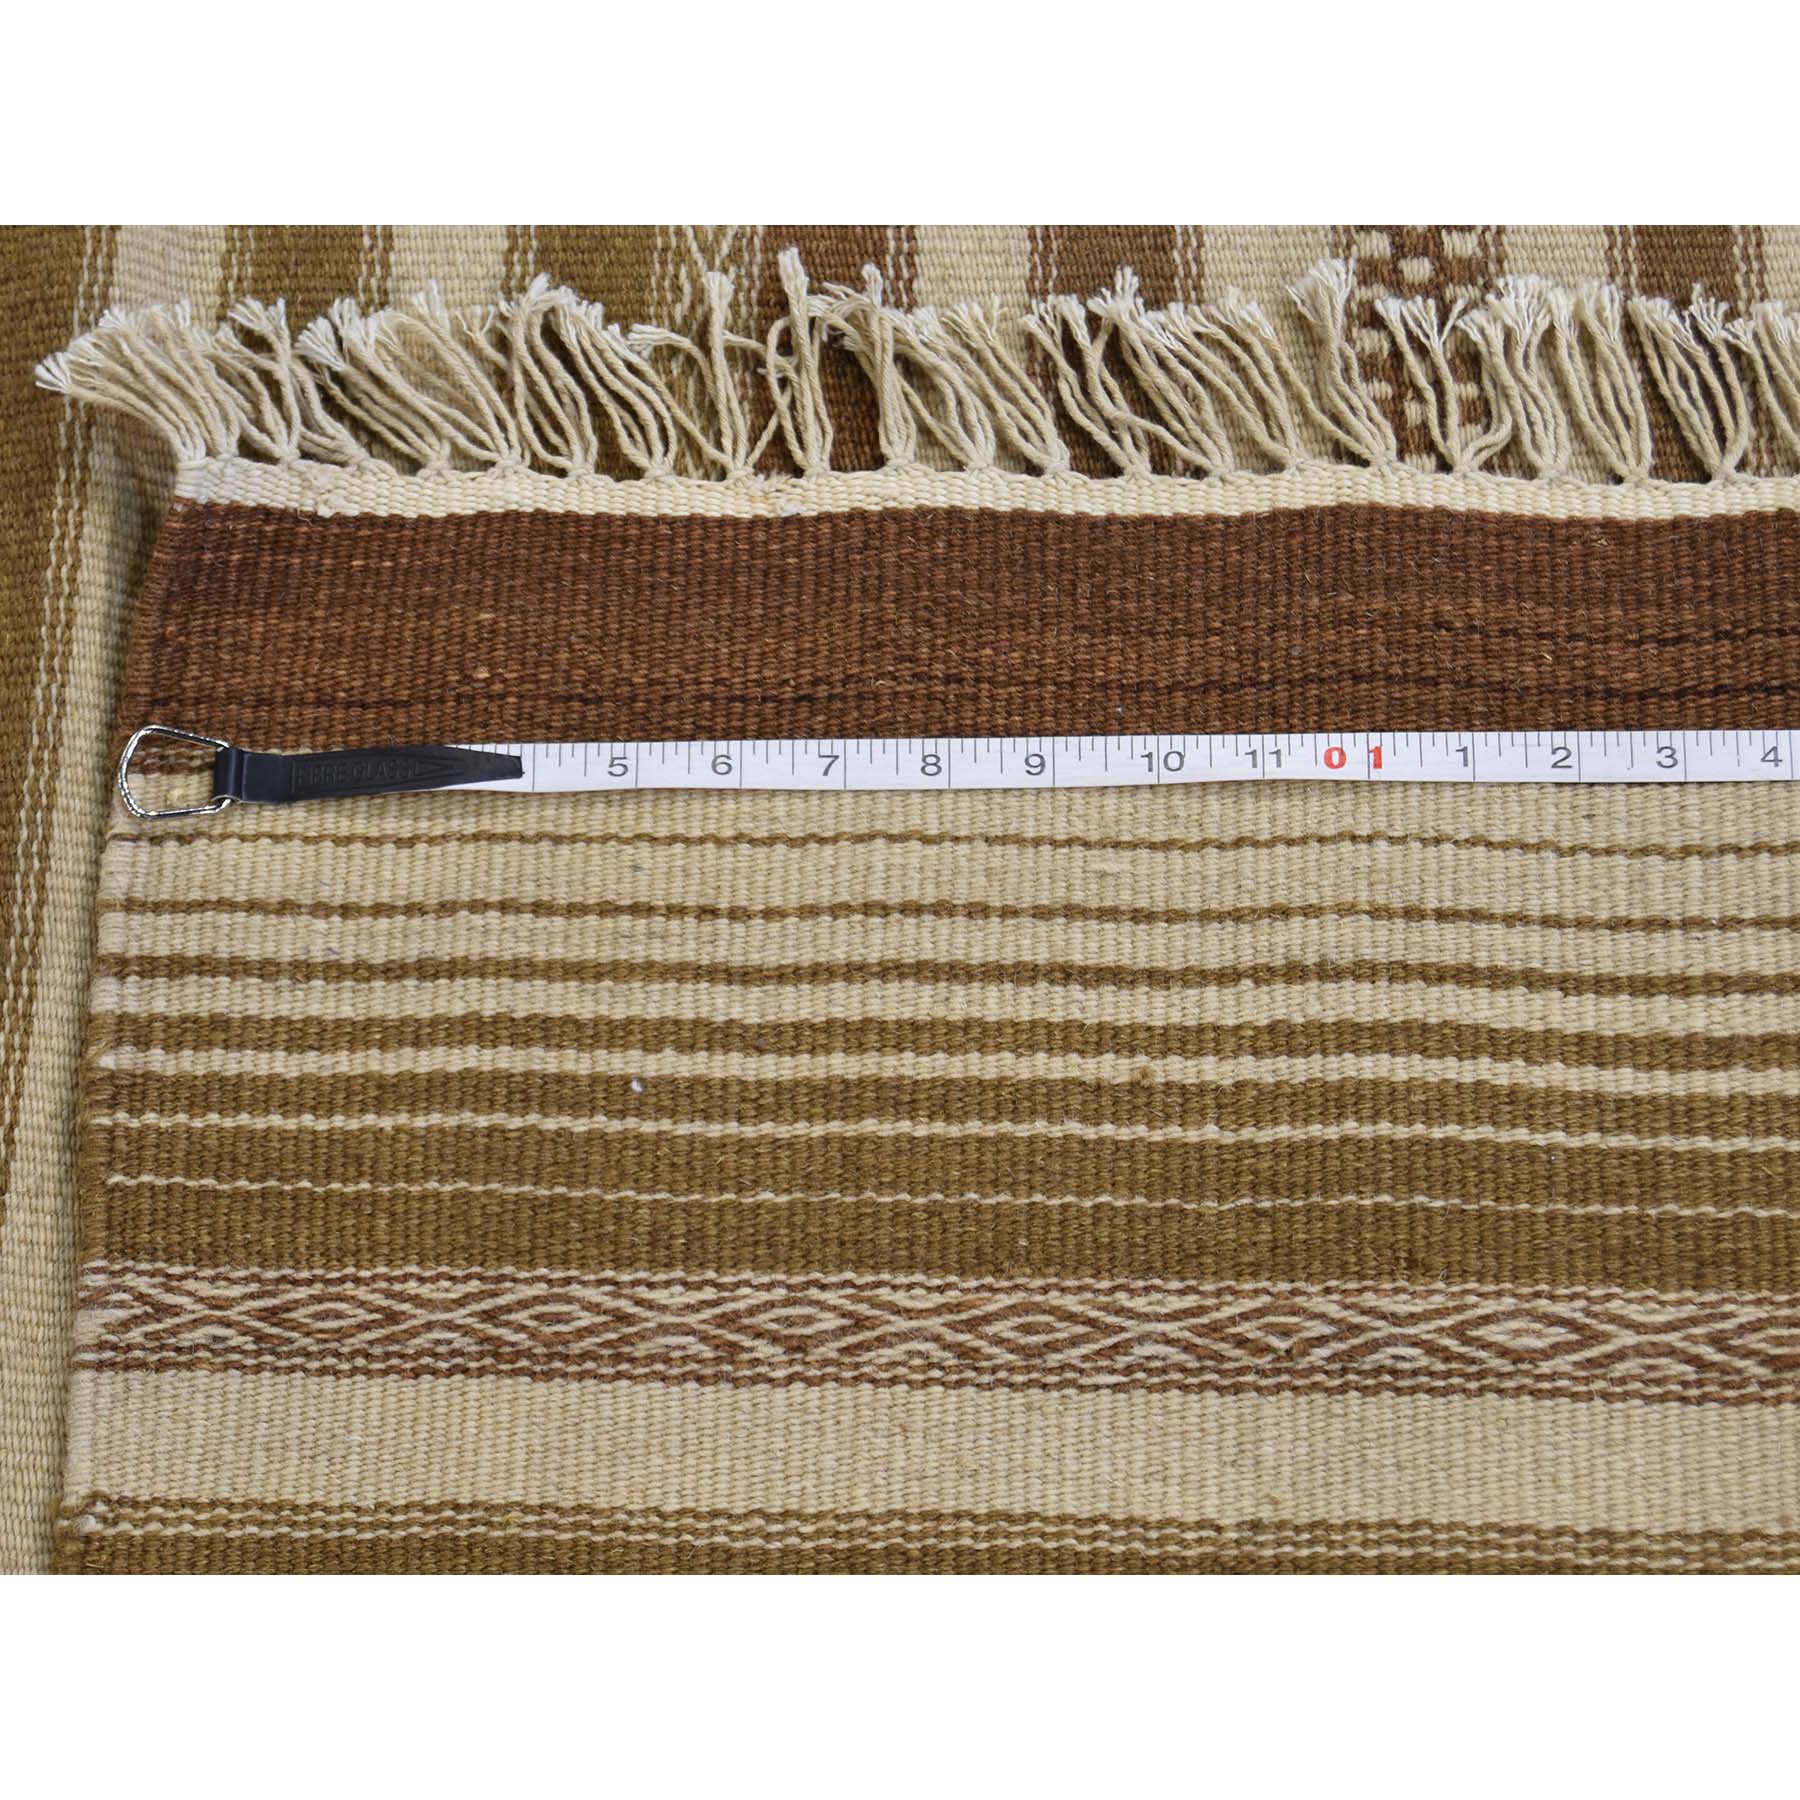 3-9--x5-10-- Striped Durie Kilim Hand Woven Flat Weave Reversible Rug 